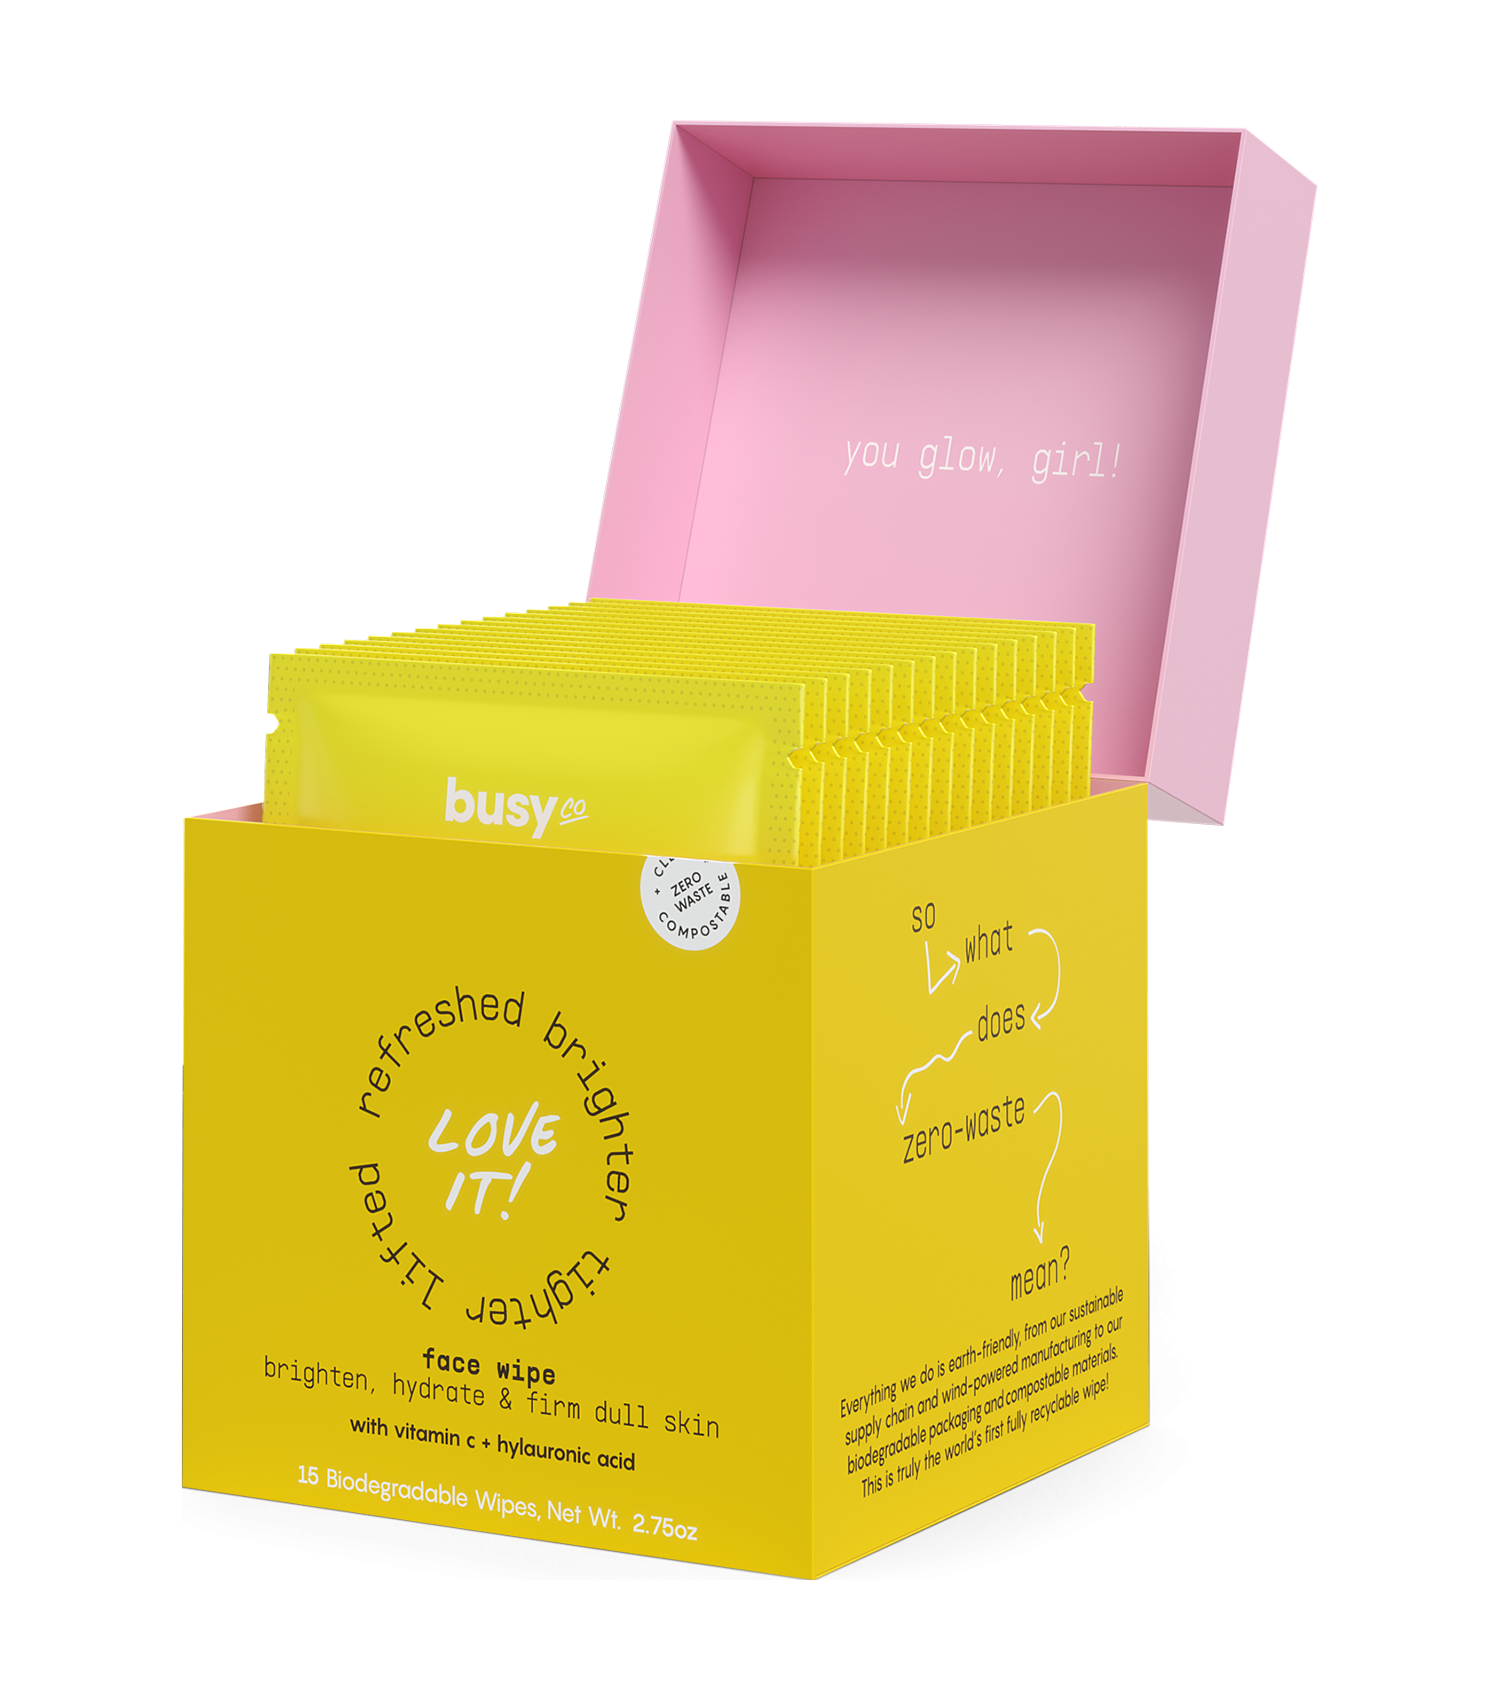 Busy Co. Glow Face Wipes (15ct) Brightening Facial Serum Pads - 1 unit 1